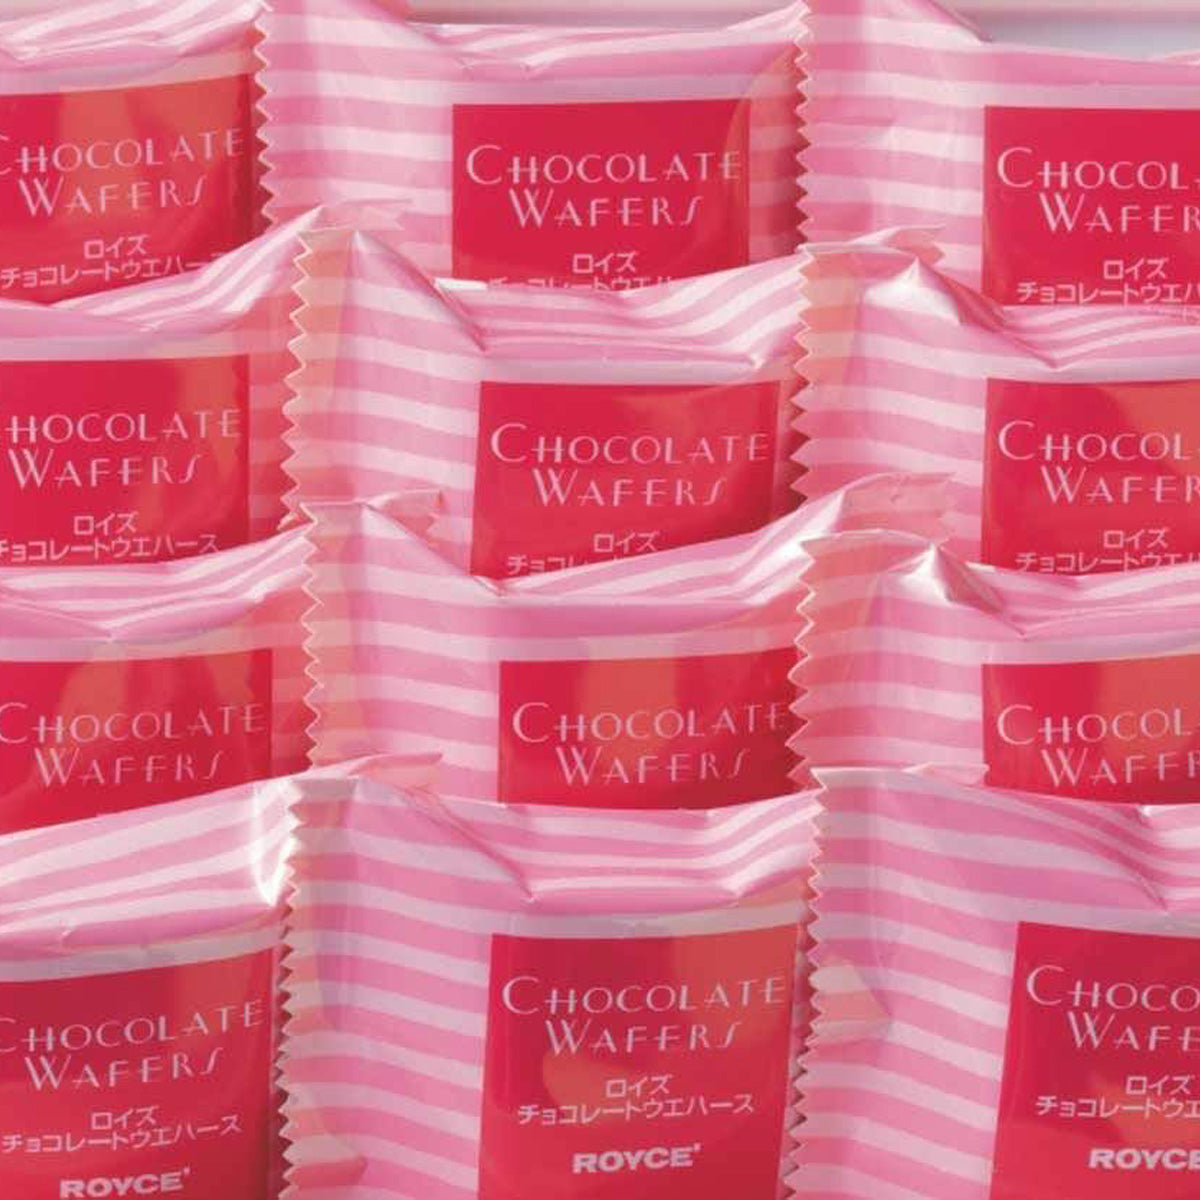 ROYCE' Chocolate - Chocolate Wafers "Strawberry Cream" - Image shows individually-wrapped pink-striped  chocolate wafers. Red text says Chocolate Wafers.